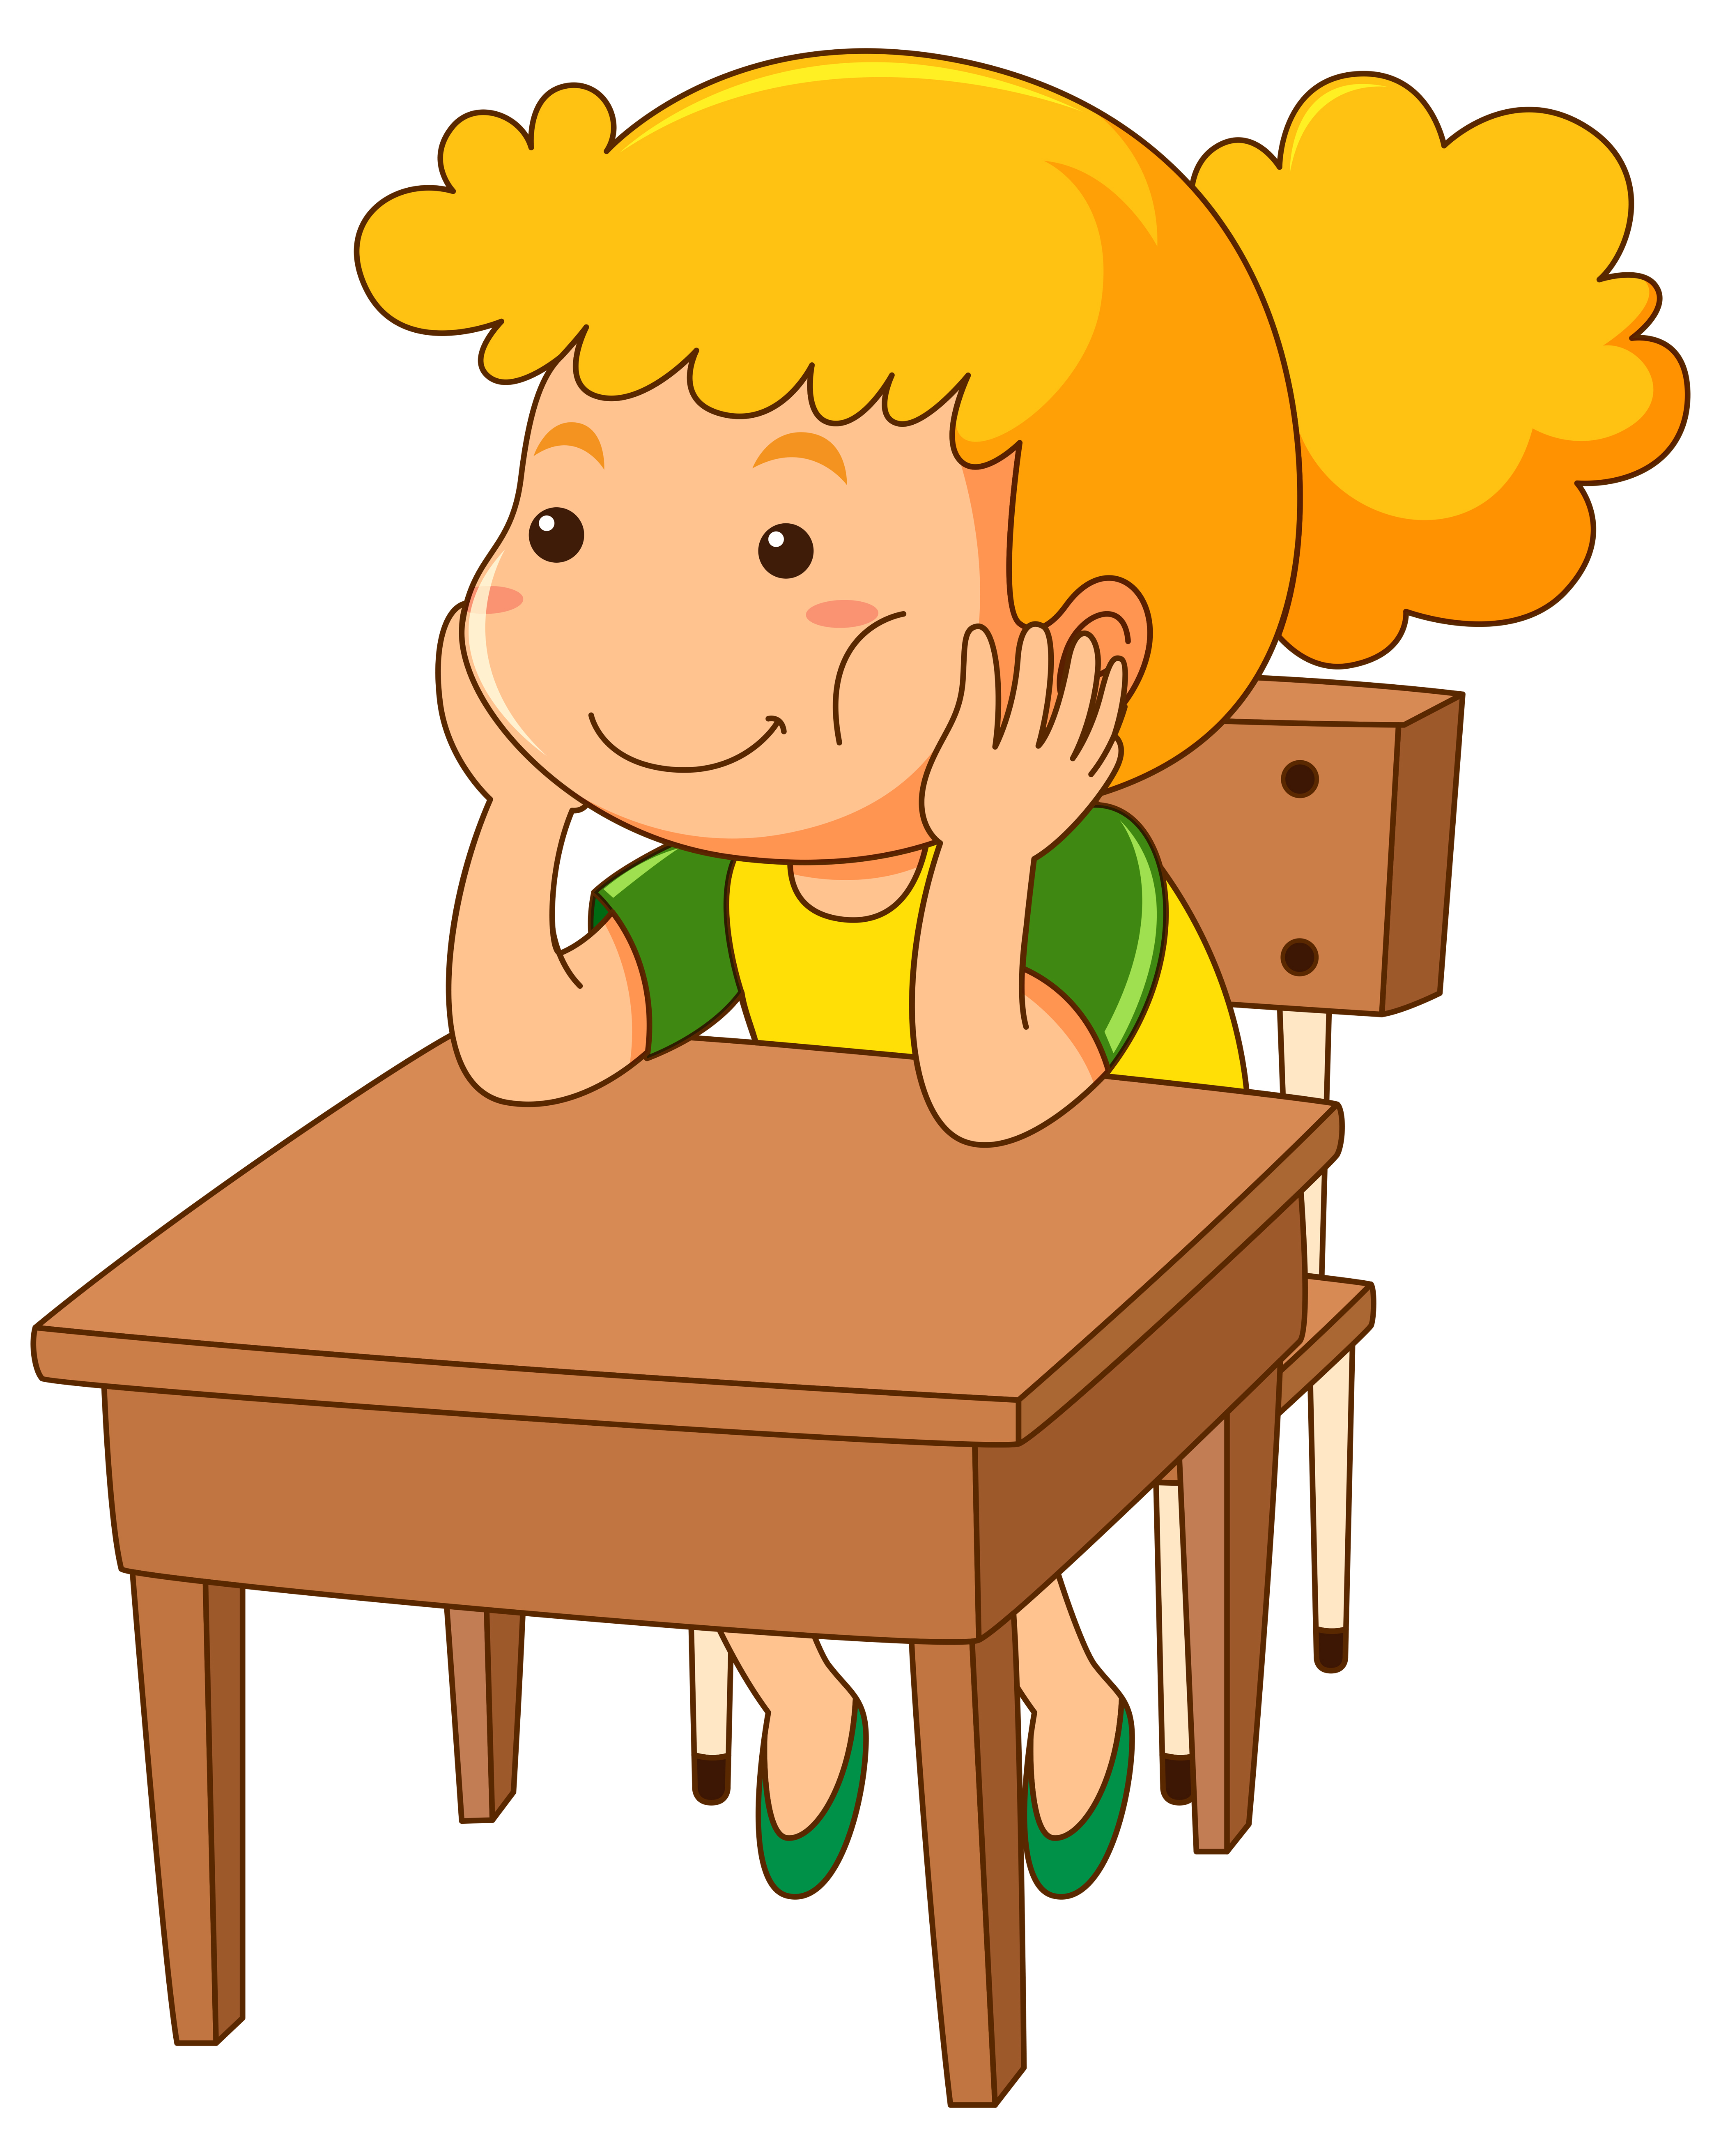 Girl Sitting On Wooden Desk Download Free Vectors Clipart.